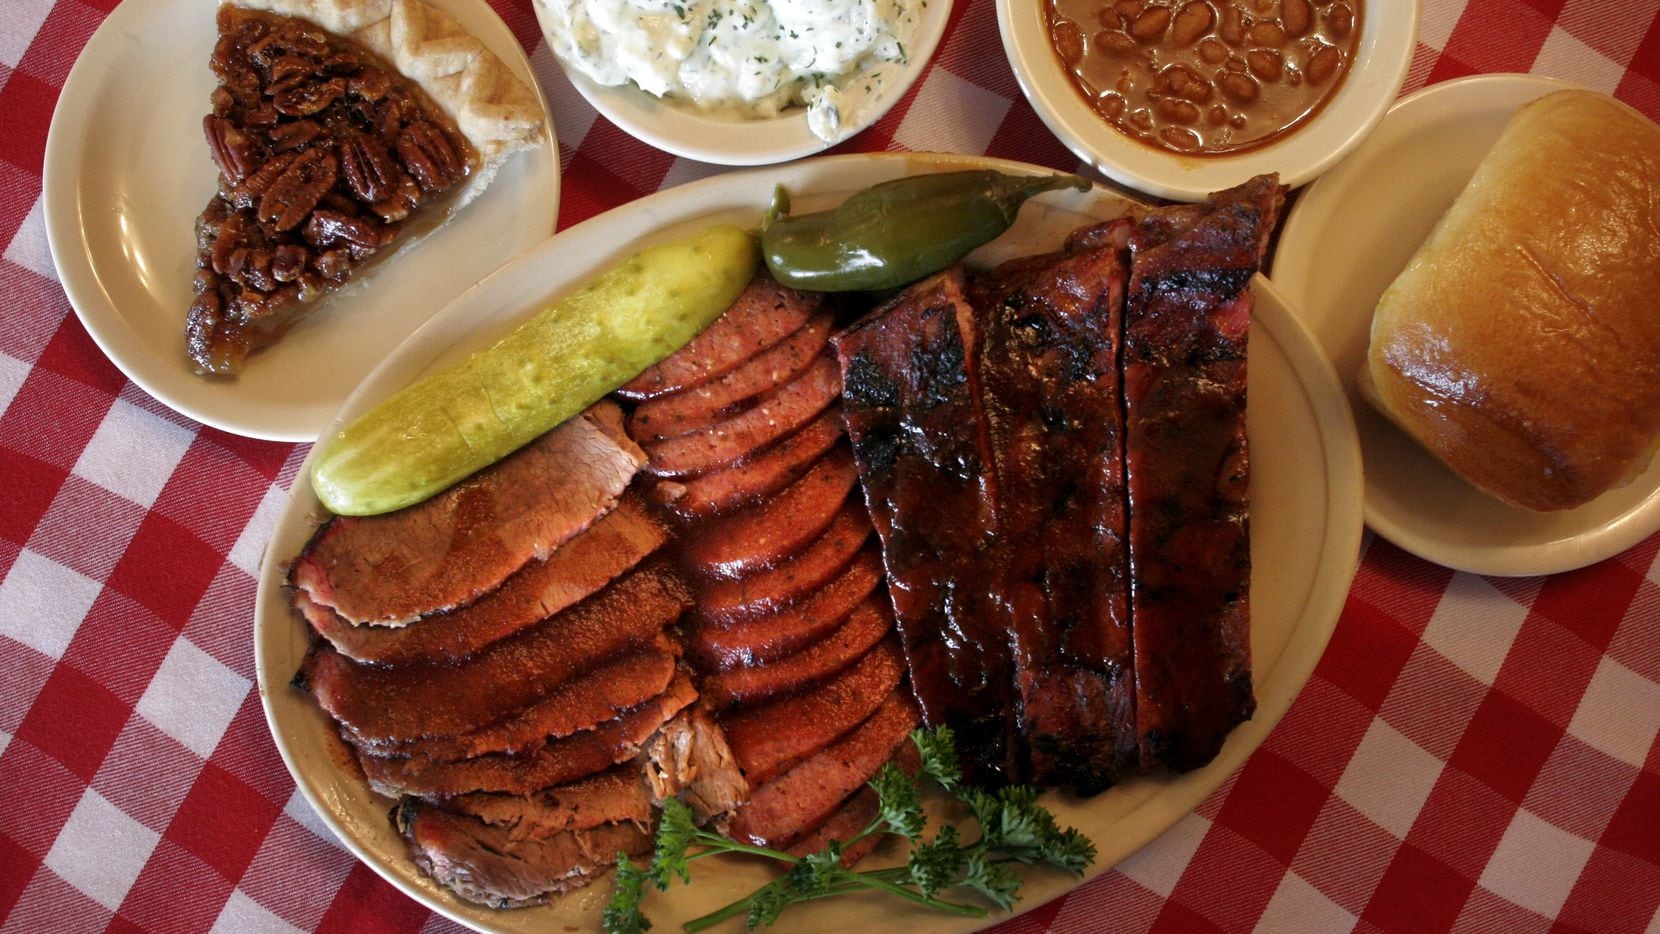 According to a statement from Dickey's Barbecue Pit, they'll start offering 'contactless...